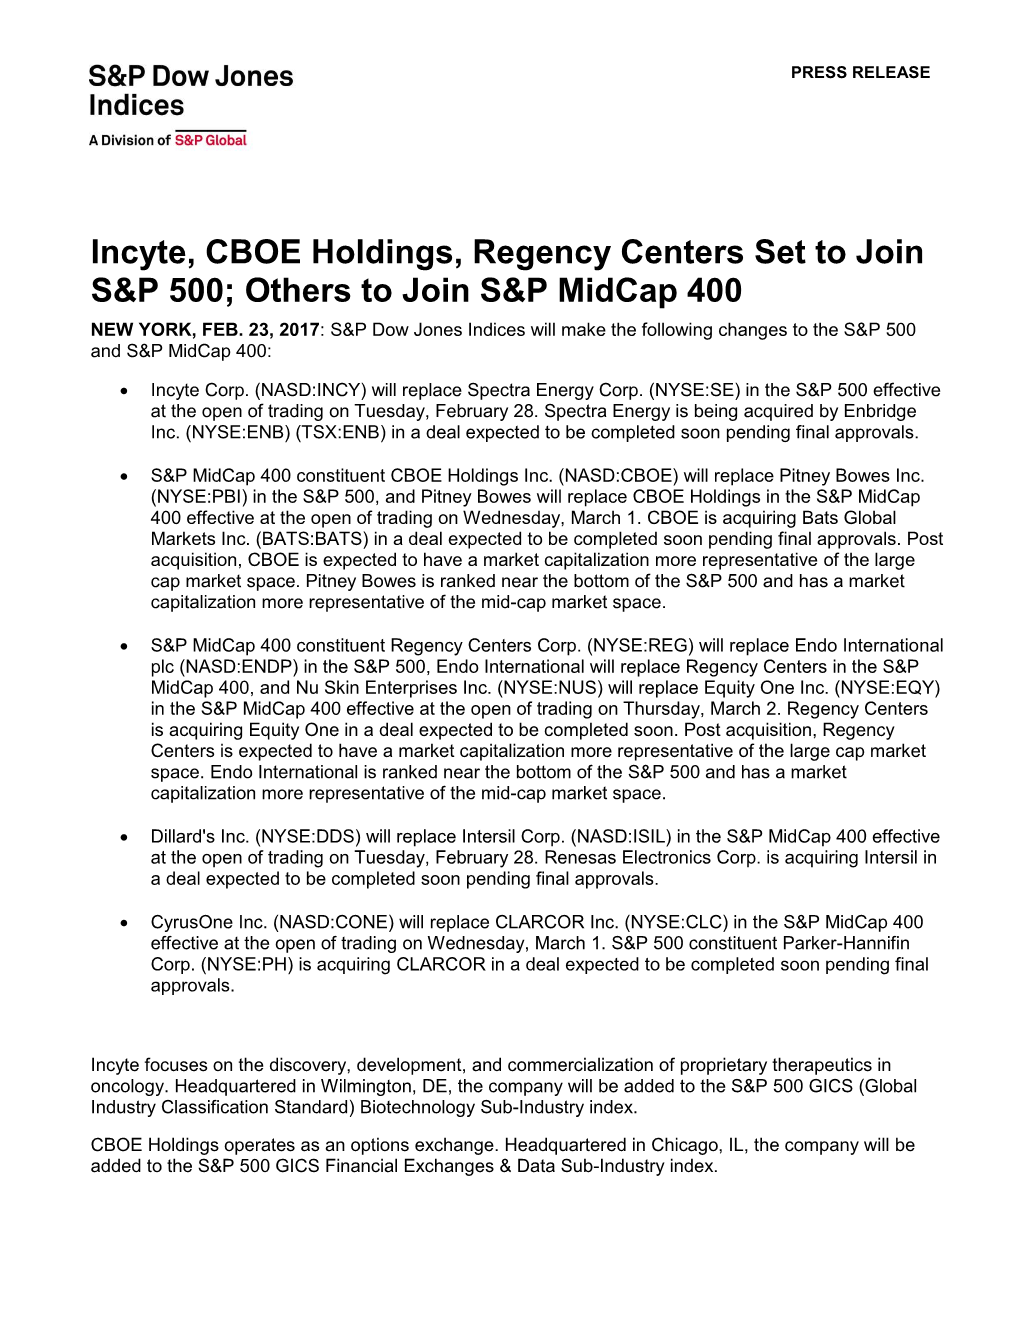 Incyte, CBOE Holdings, Regency Centers Set to Join S&P 500